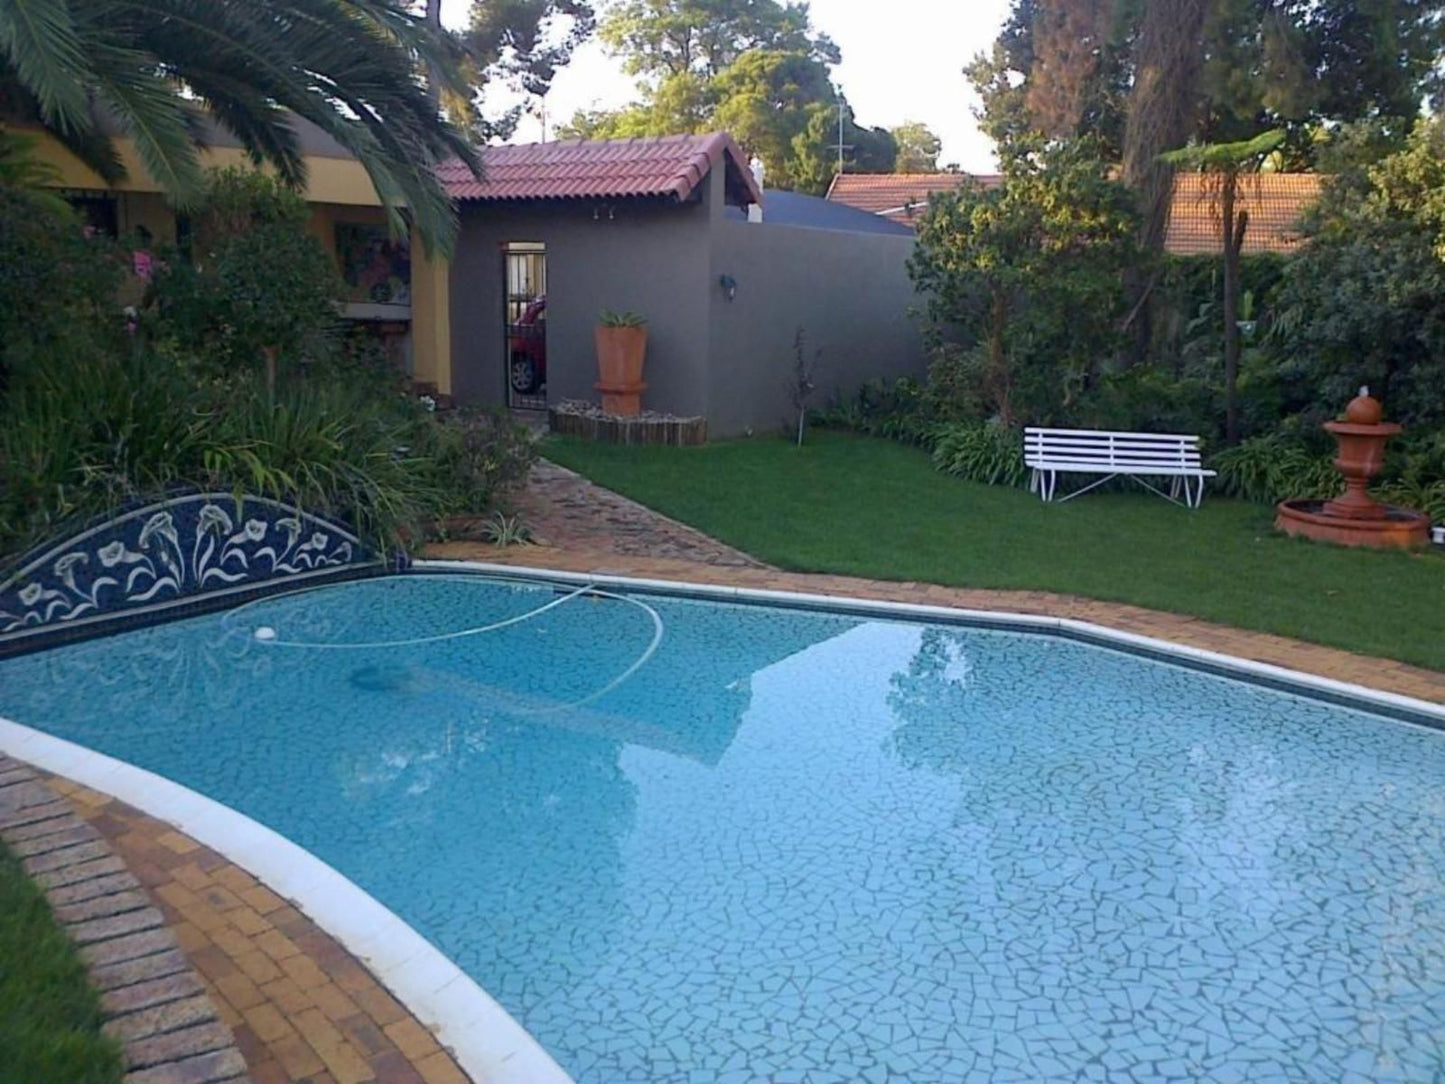 Jubilee Lodge Northcliff Johannesburg Gauteng South Africa House, Building, Architecture, Palm Tree, Plant, Nature, Wood, Garden, Swimming Pool